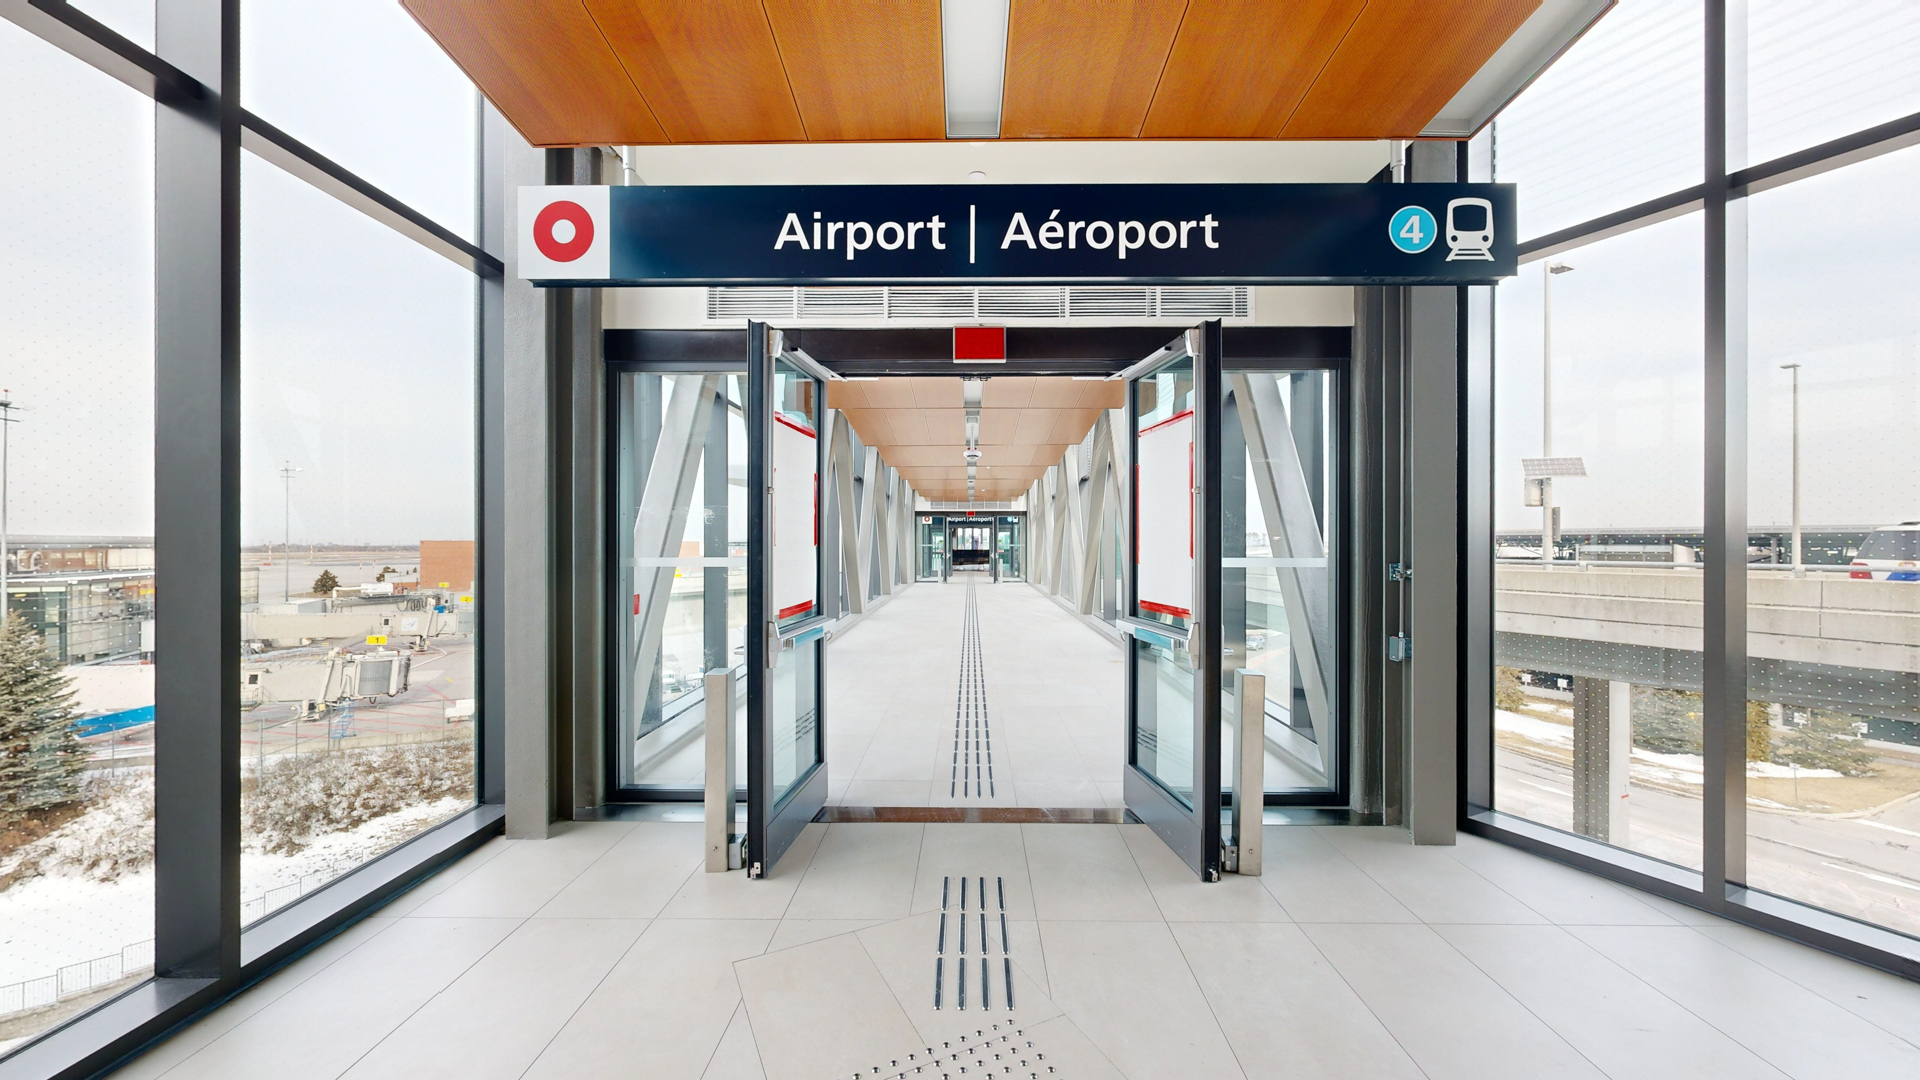 Ongoing work in Ottawa will connect the O-Train to Macdonald-Cartier International Airport